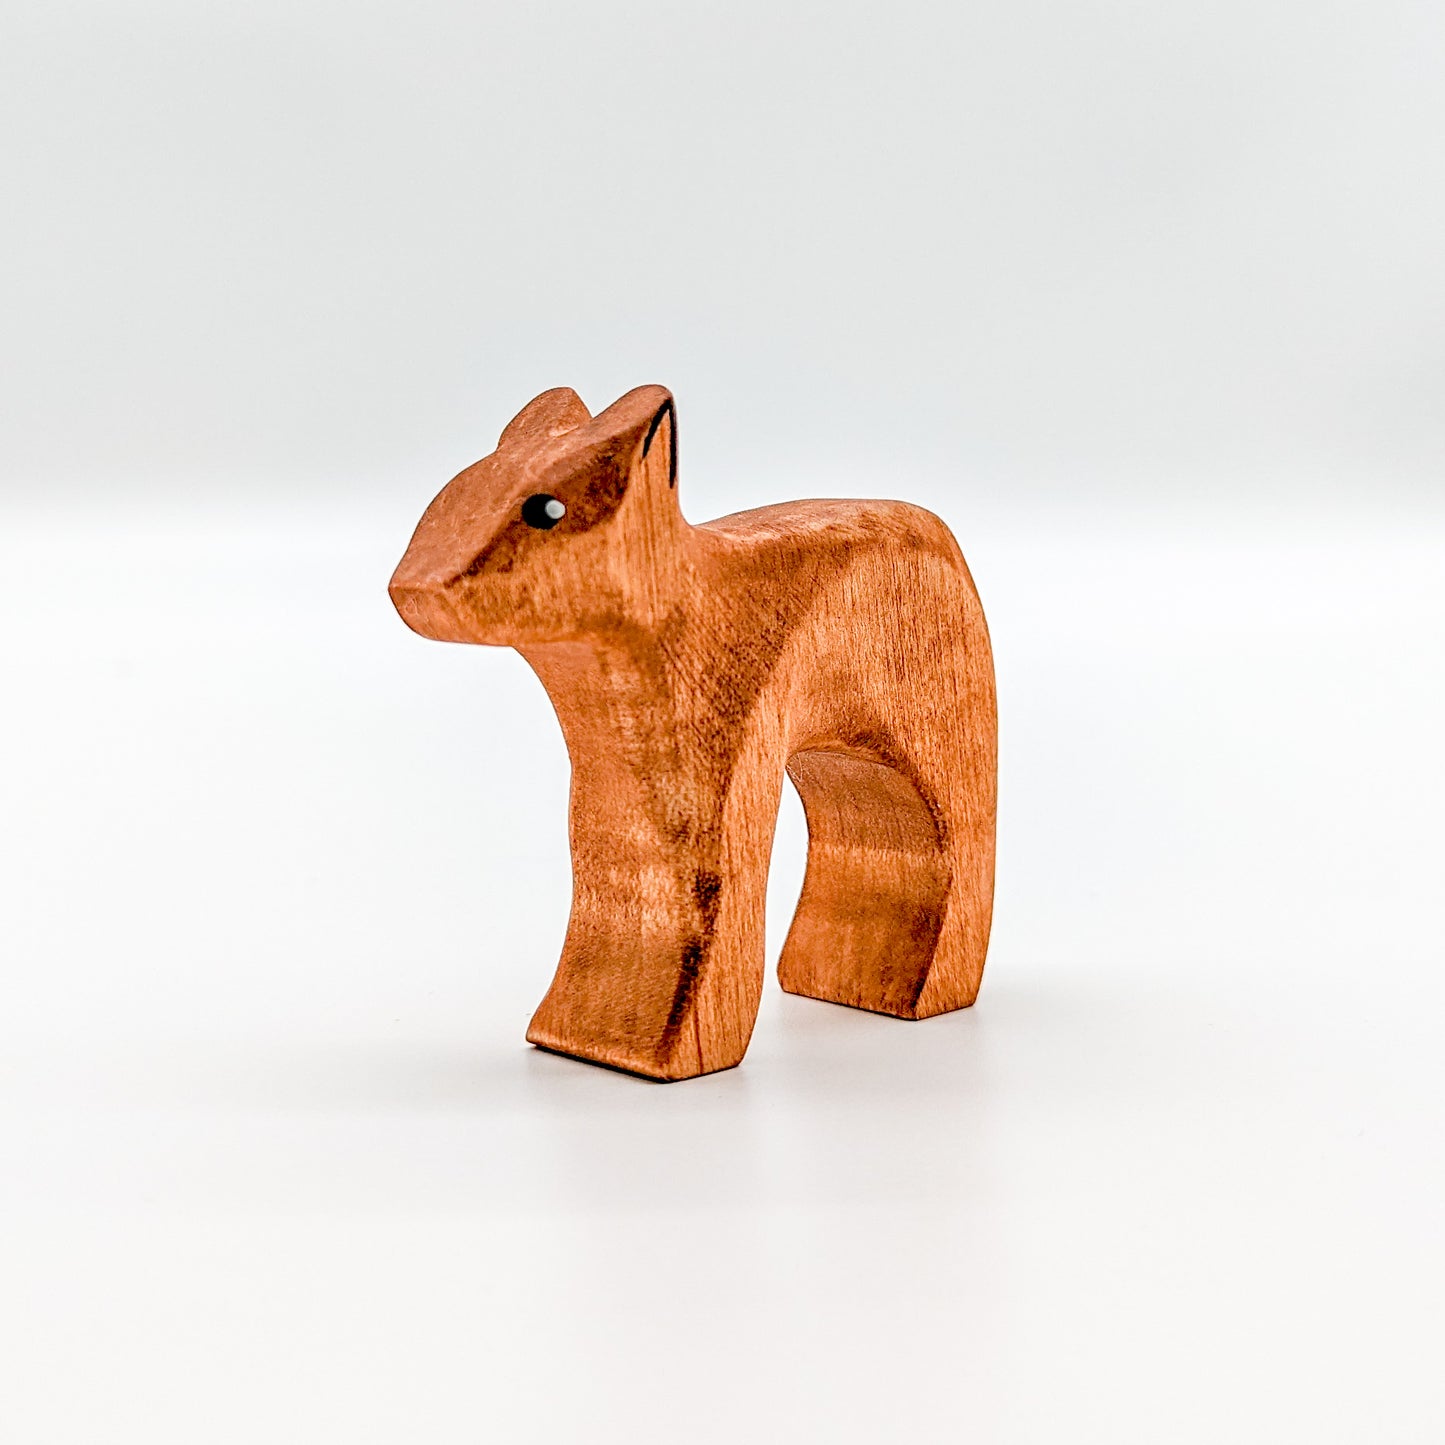 Calf Standing Wooden Toy